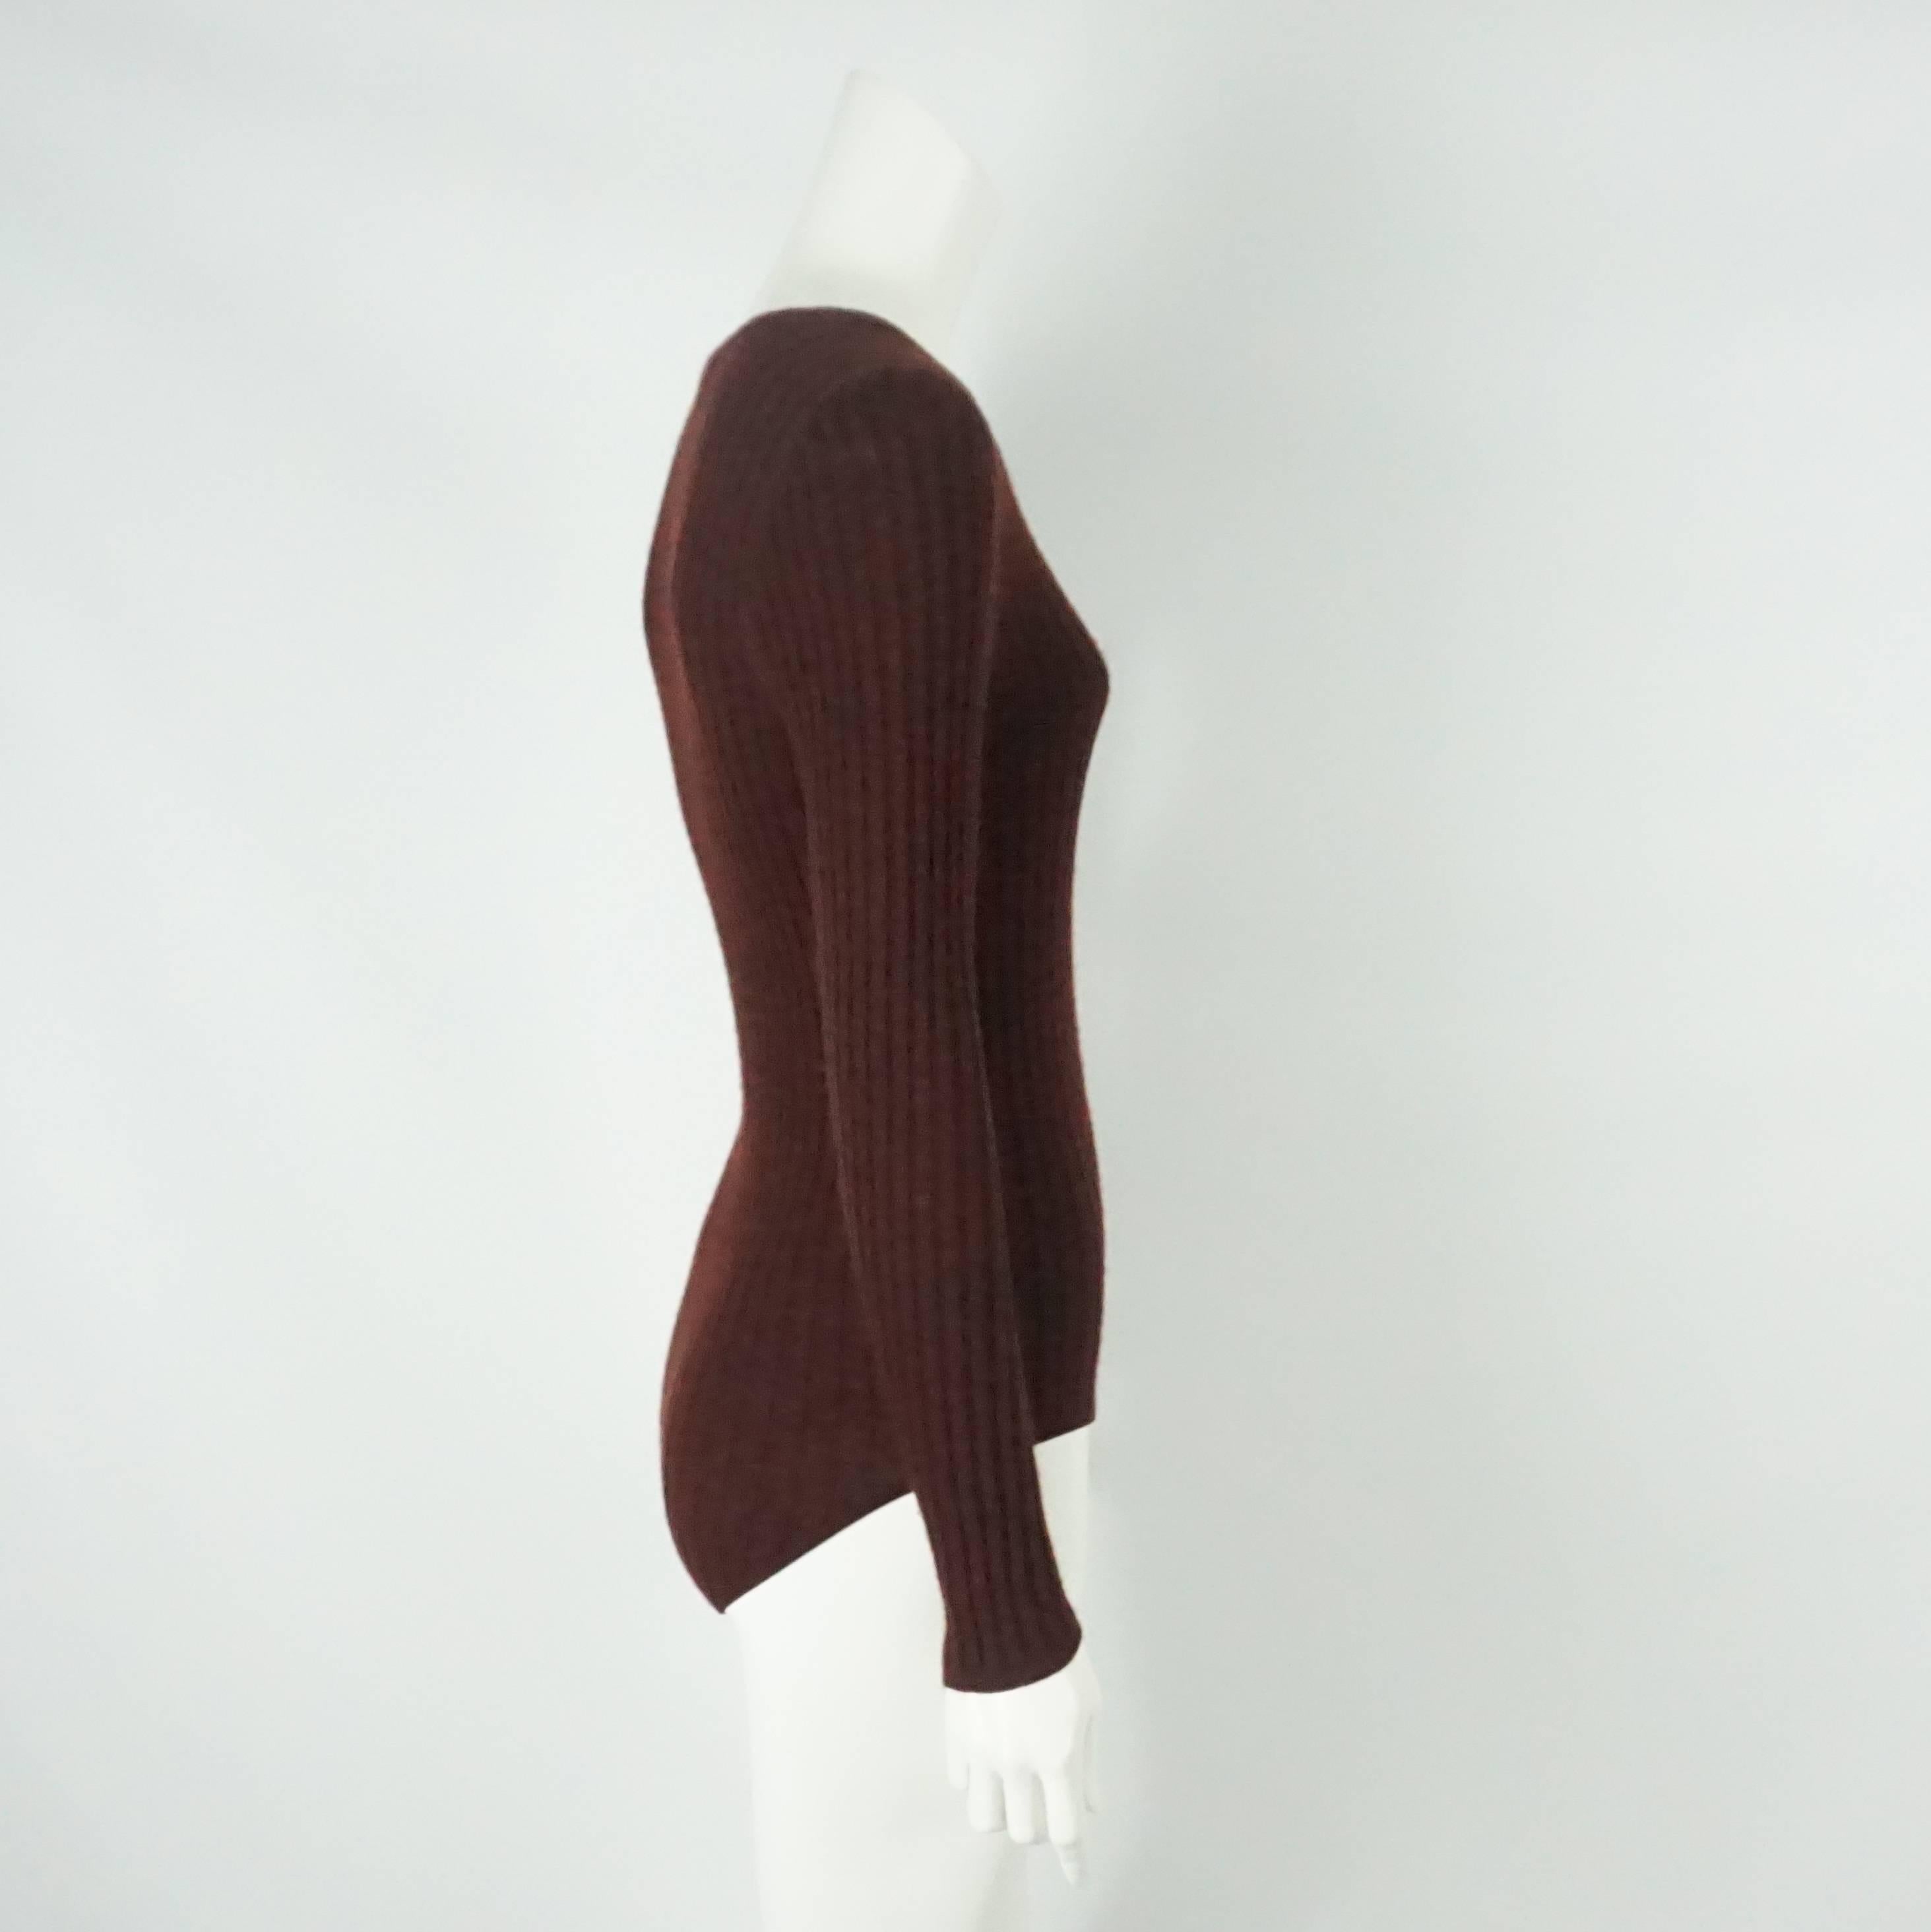 Chanel Burgundy Cashmere/Silk Blend Ribbed L/S bodysuit - 44 - Circa 97A  This bodysuit has a round neck, ribbed sweater style with long sleeves and a stitched CC on bottom left, 3 snaps in the crotch area. This item is in excellent vintage